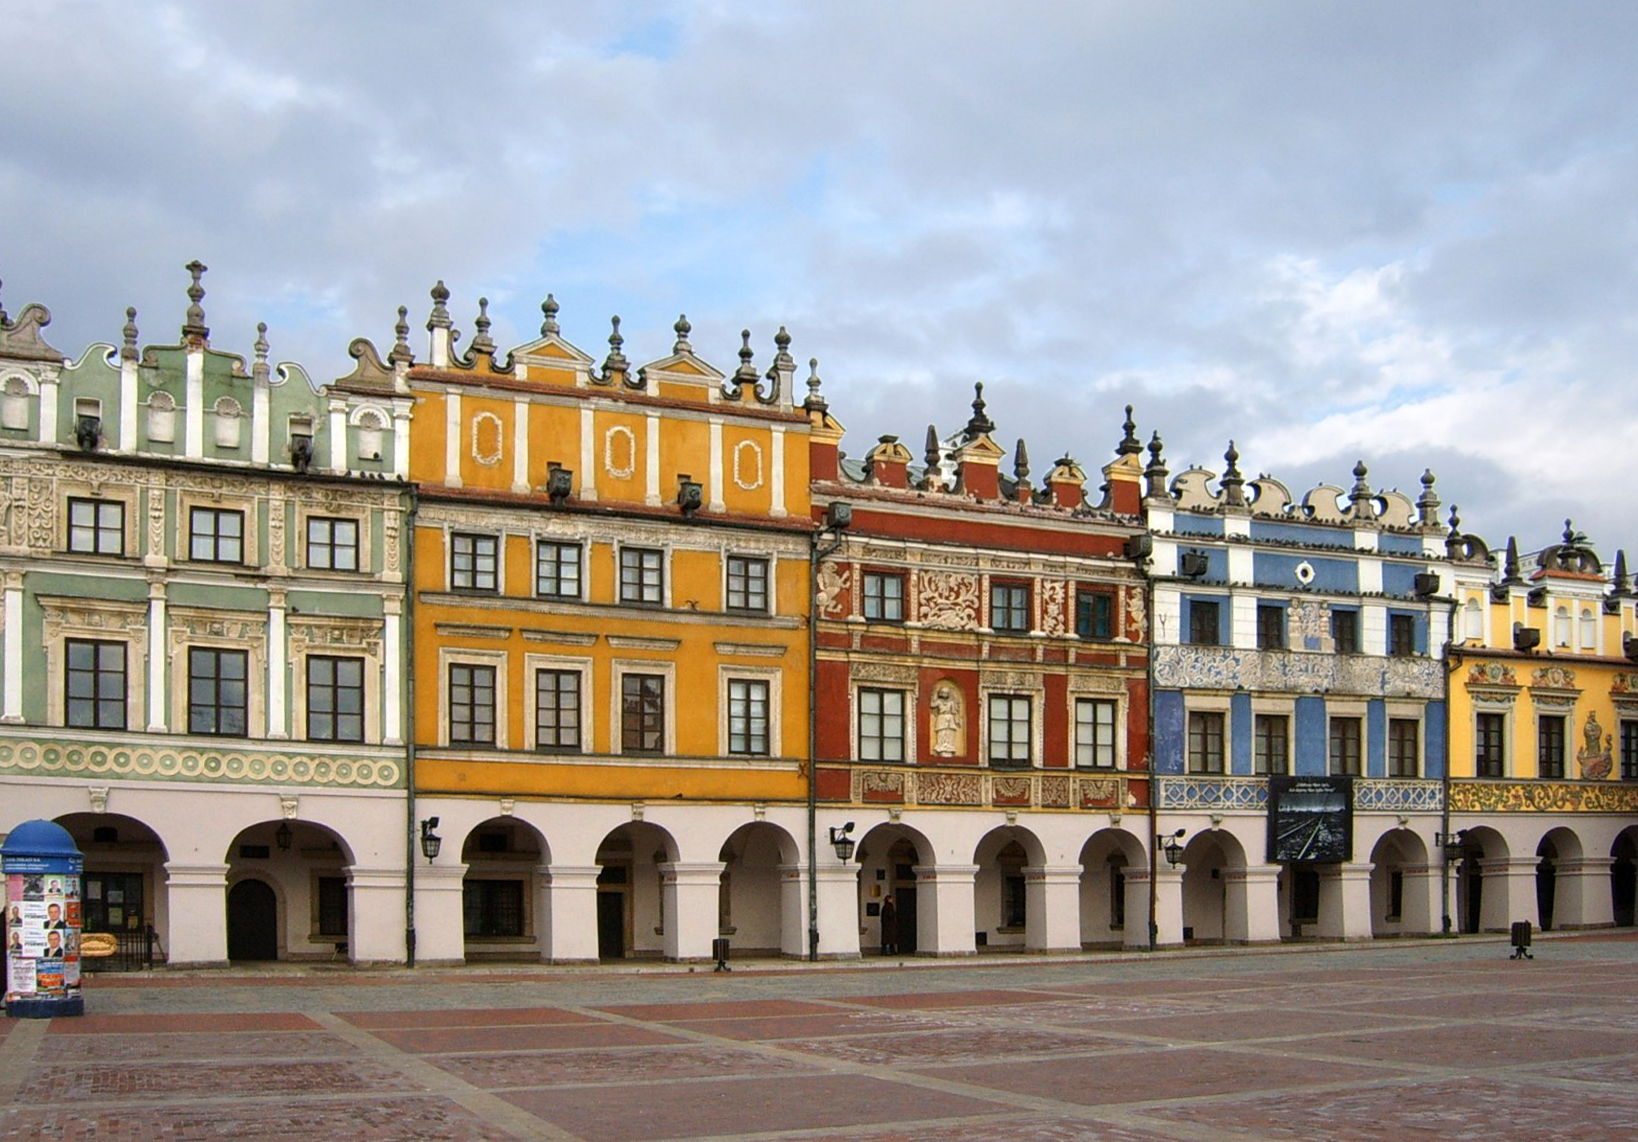 Houses of Armenian merchants dating back to the 17th century, by the market square in Zamość, south-eastern Poland; the Old City of Zamość is on the UNESCO World Heritage List